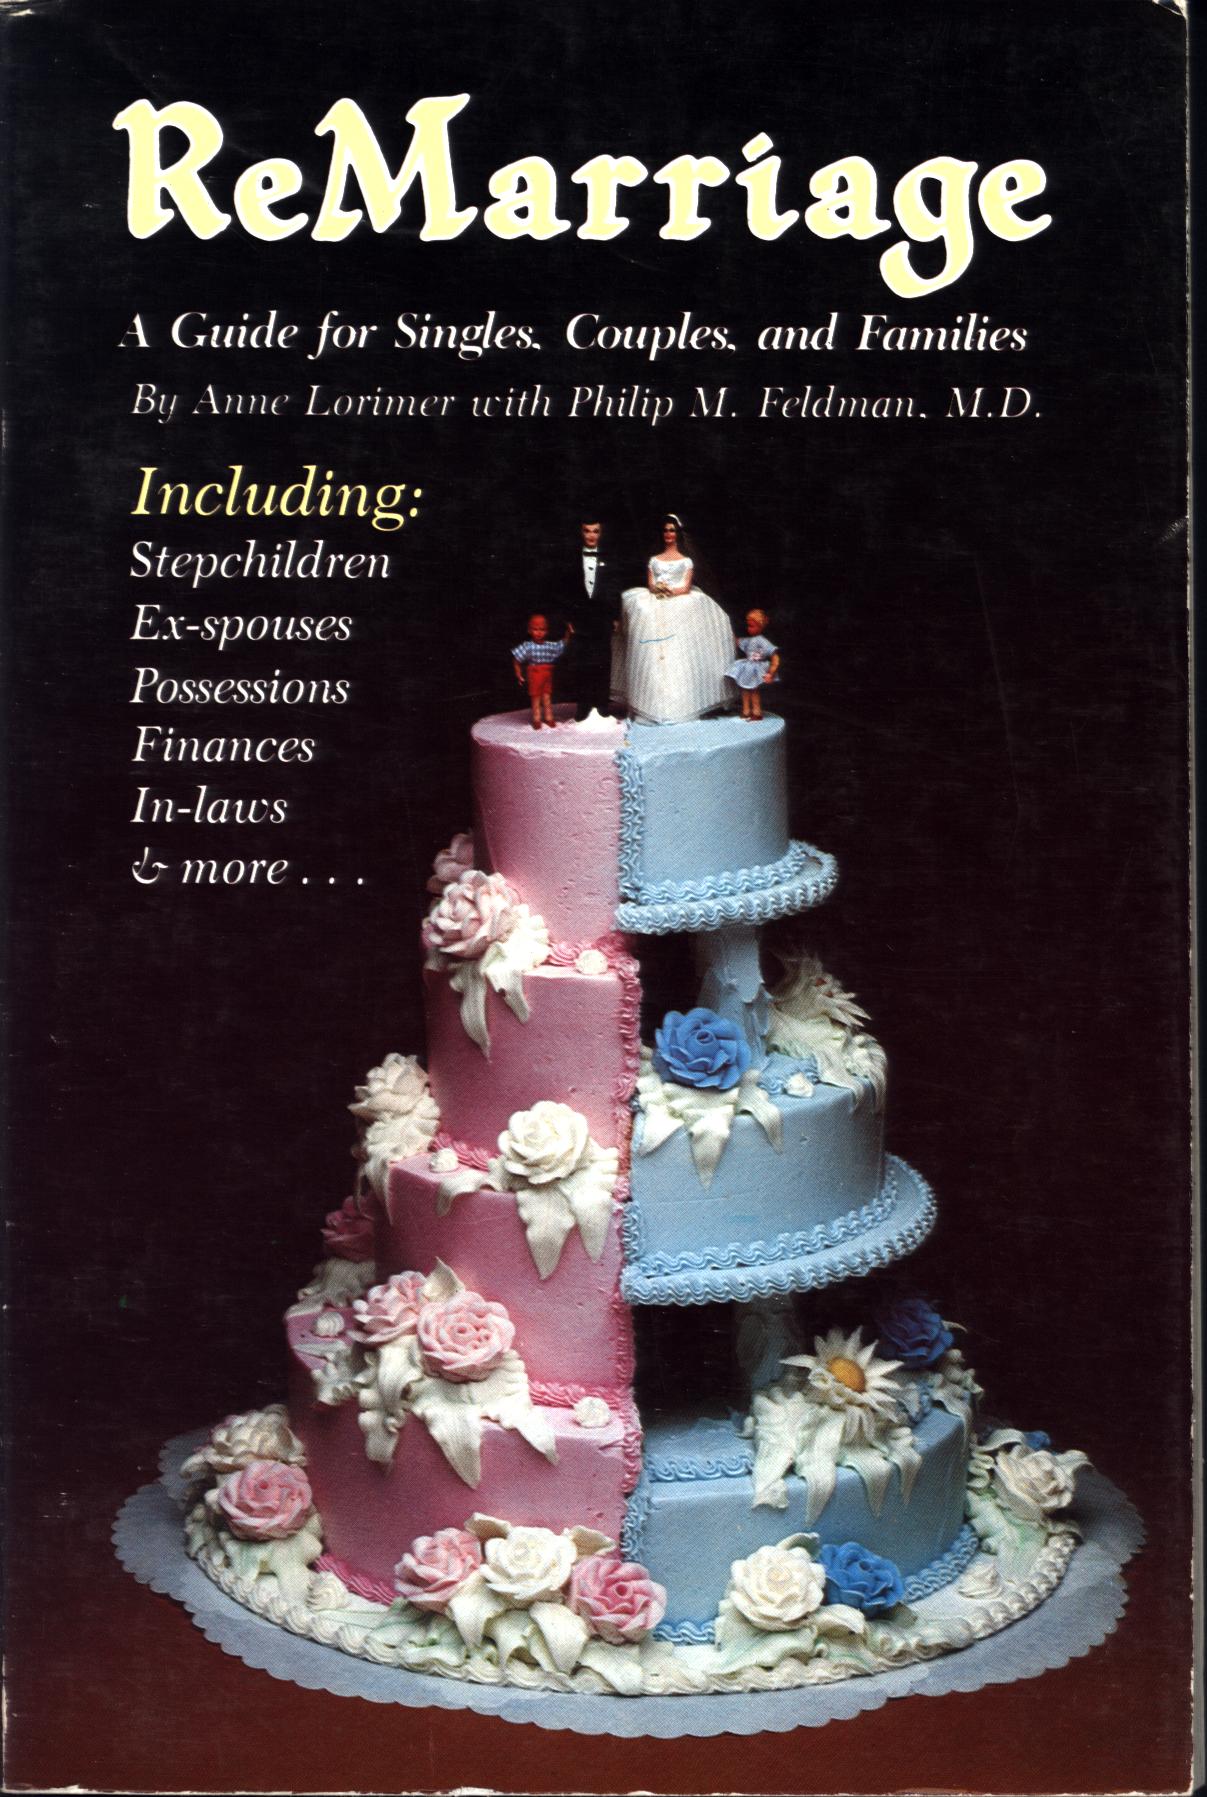 REMARRIAGE: a guide for singles, couples, and families.